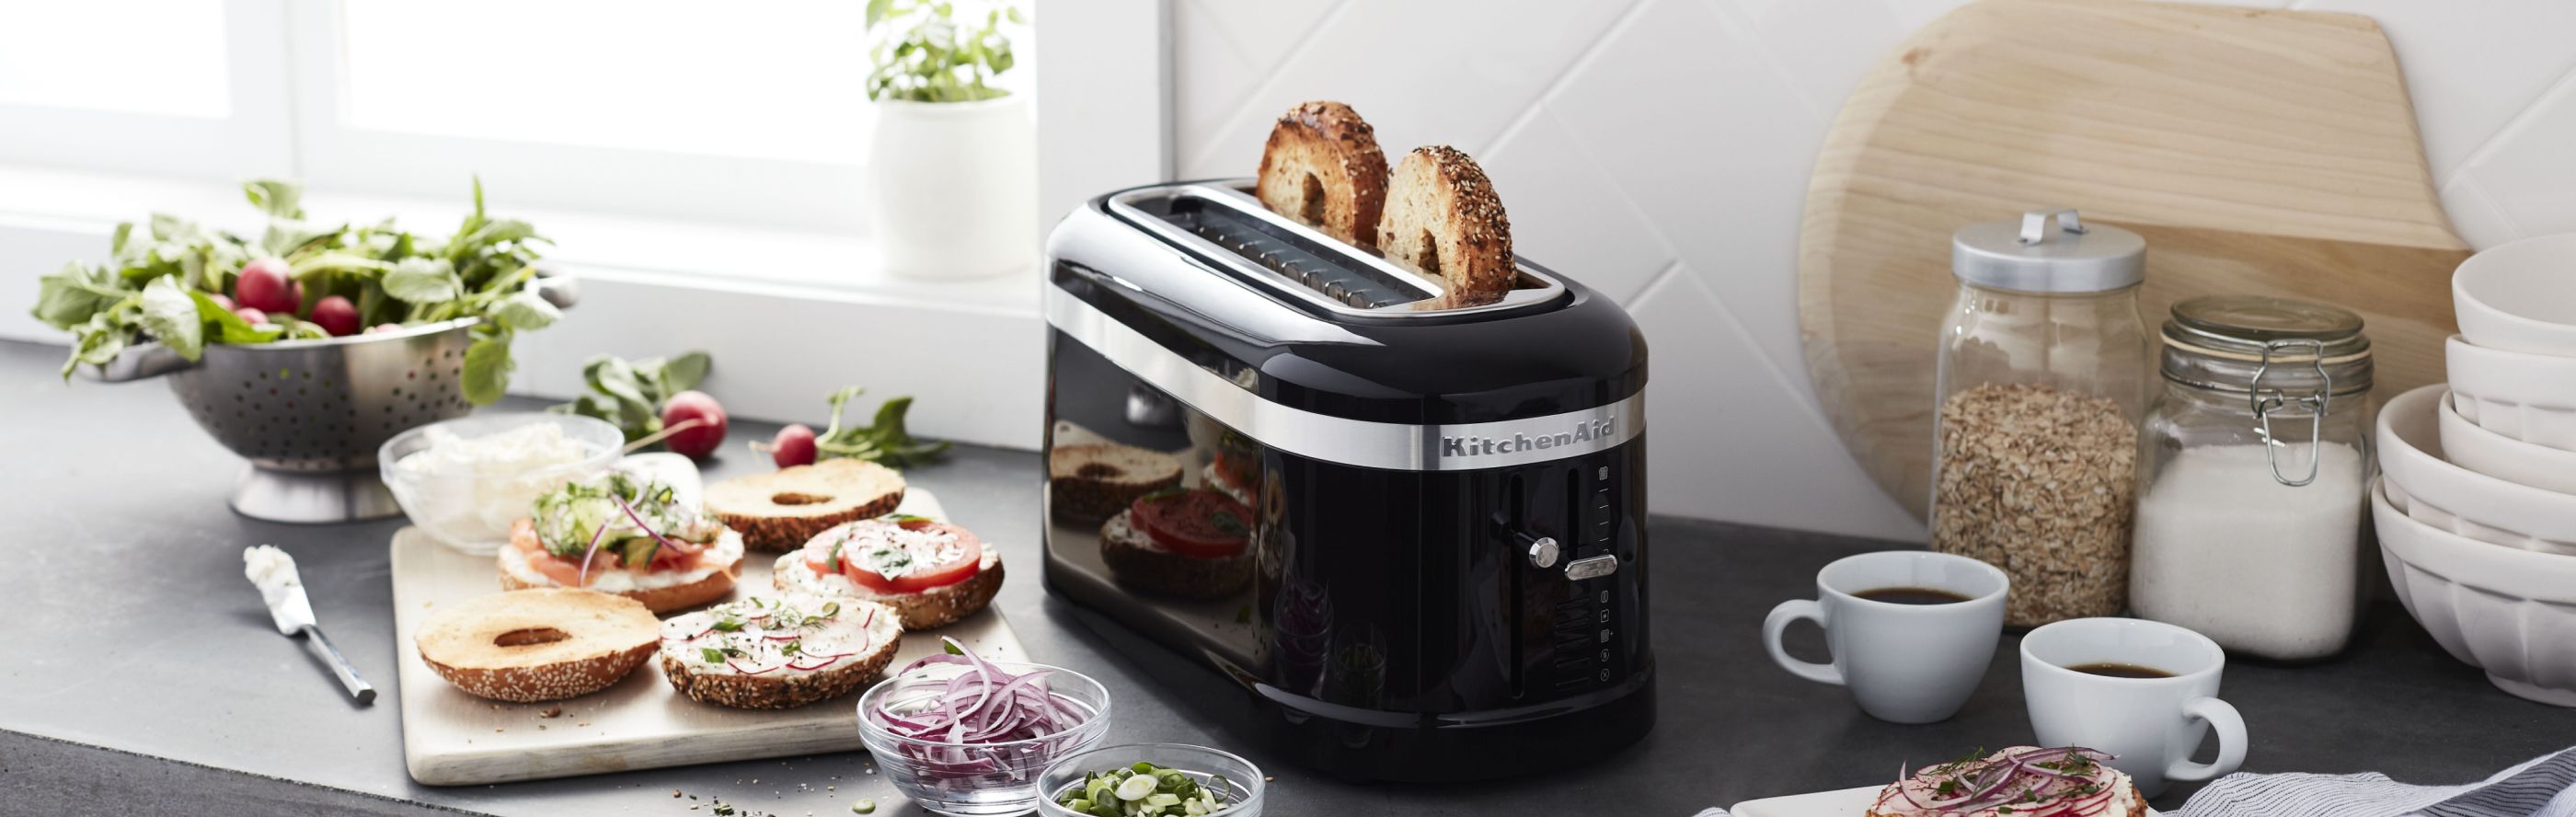 Bagel slices in a pop-up KitchenAid® toaster on a modern kitchen counter next to bagel sandwich fixings.